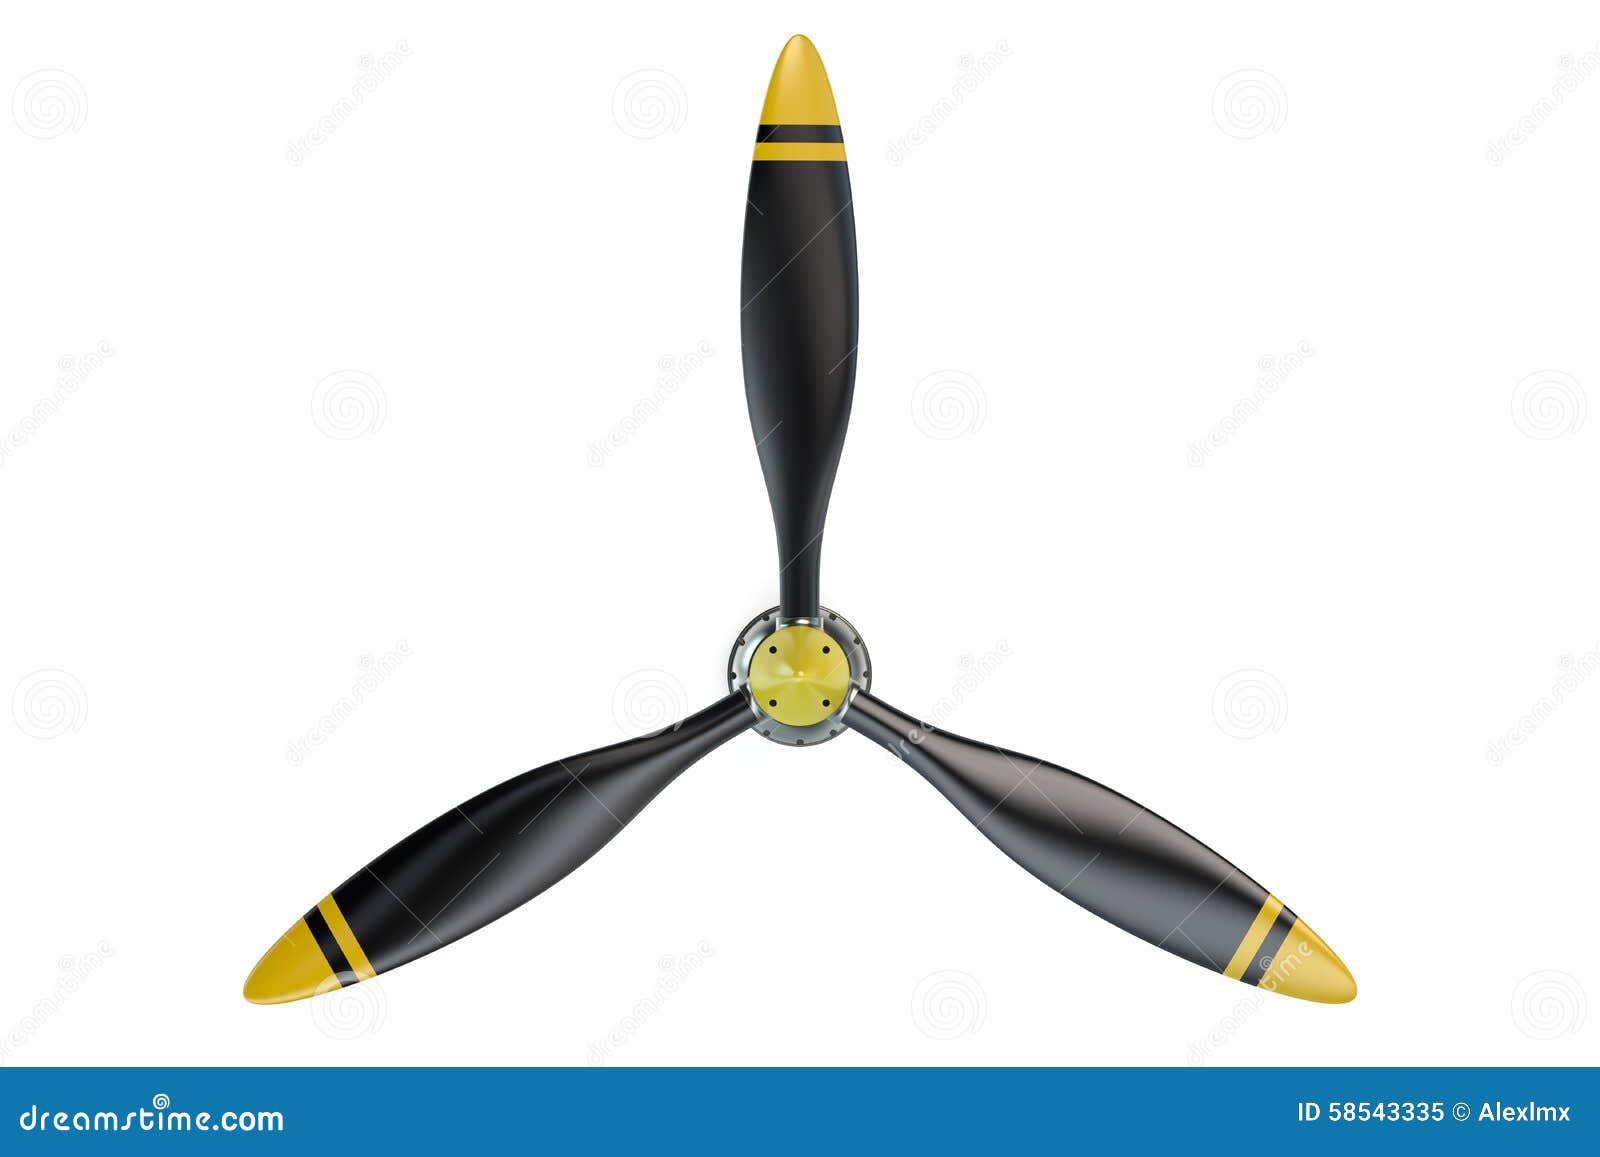 airplane propeller clipart - photo #16